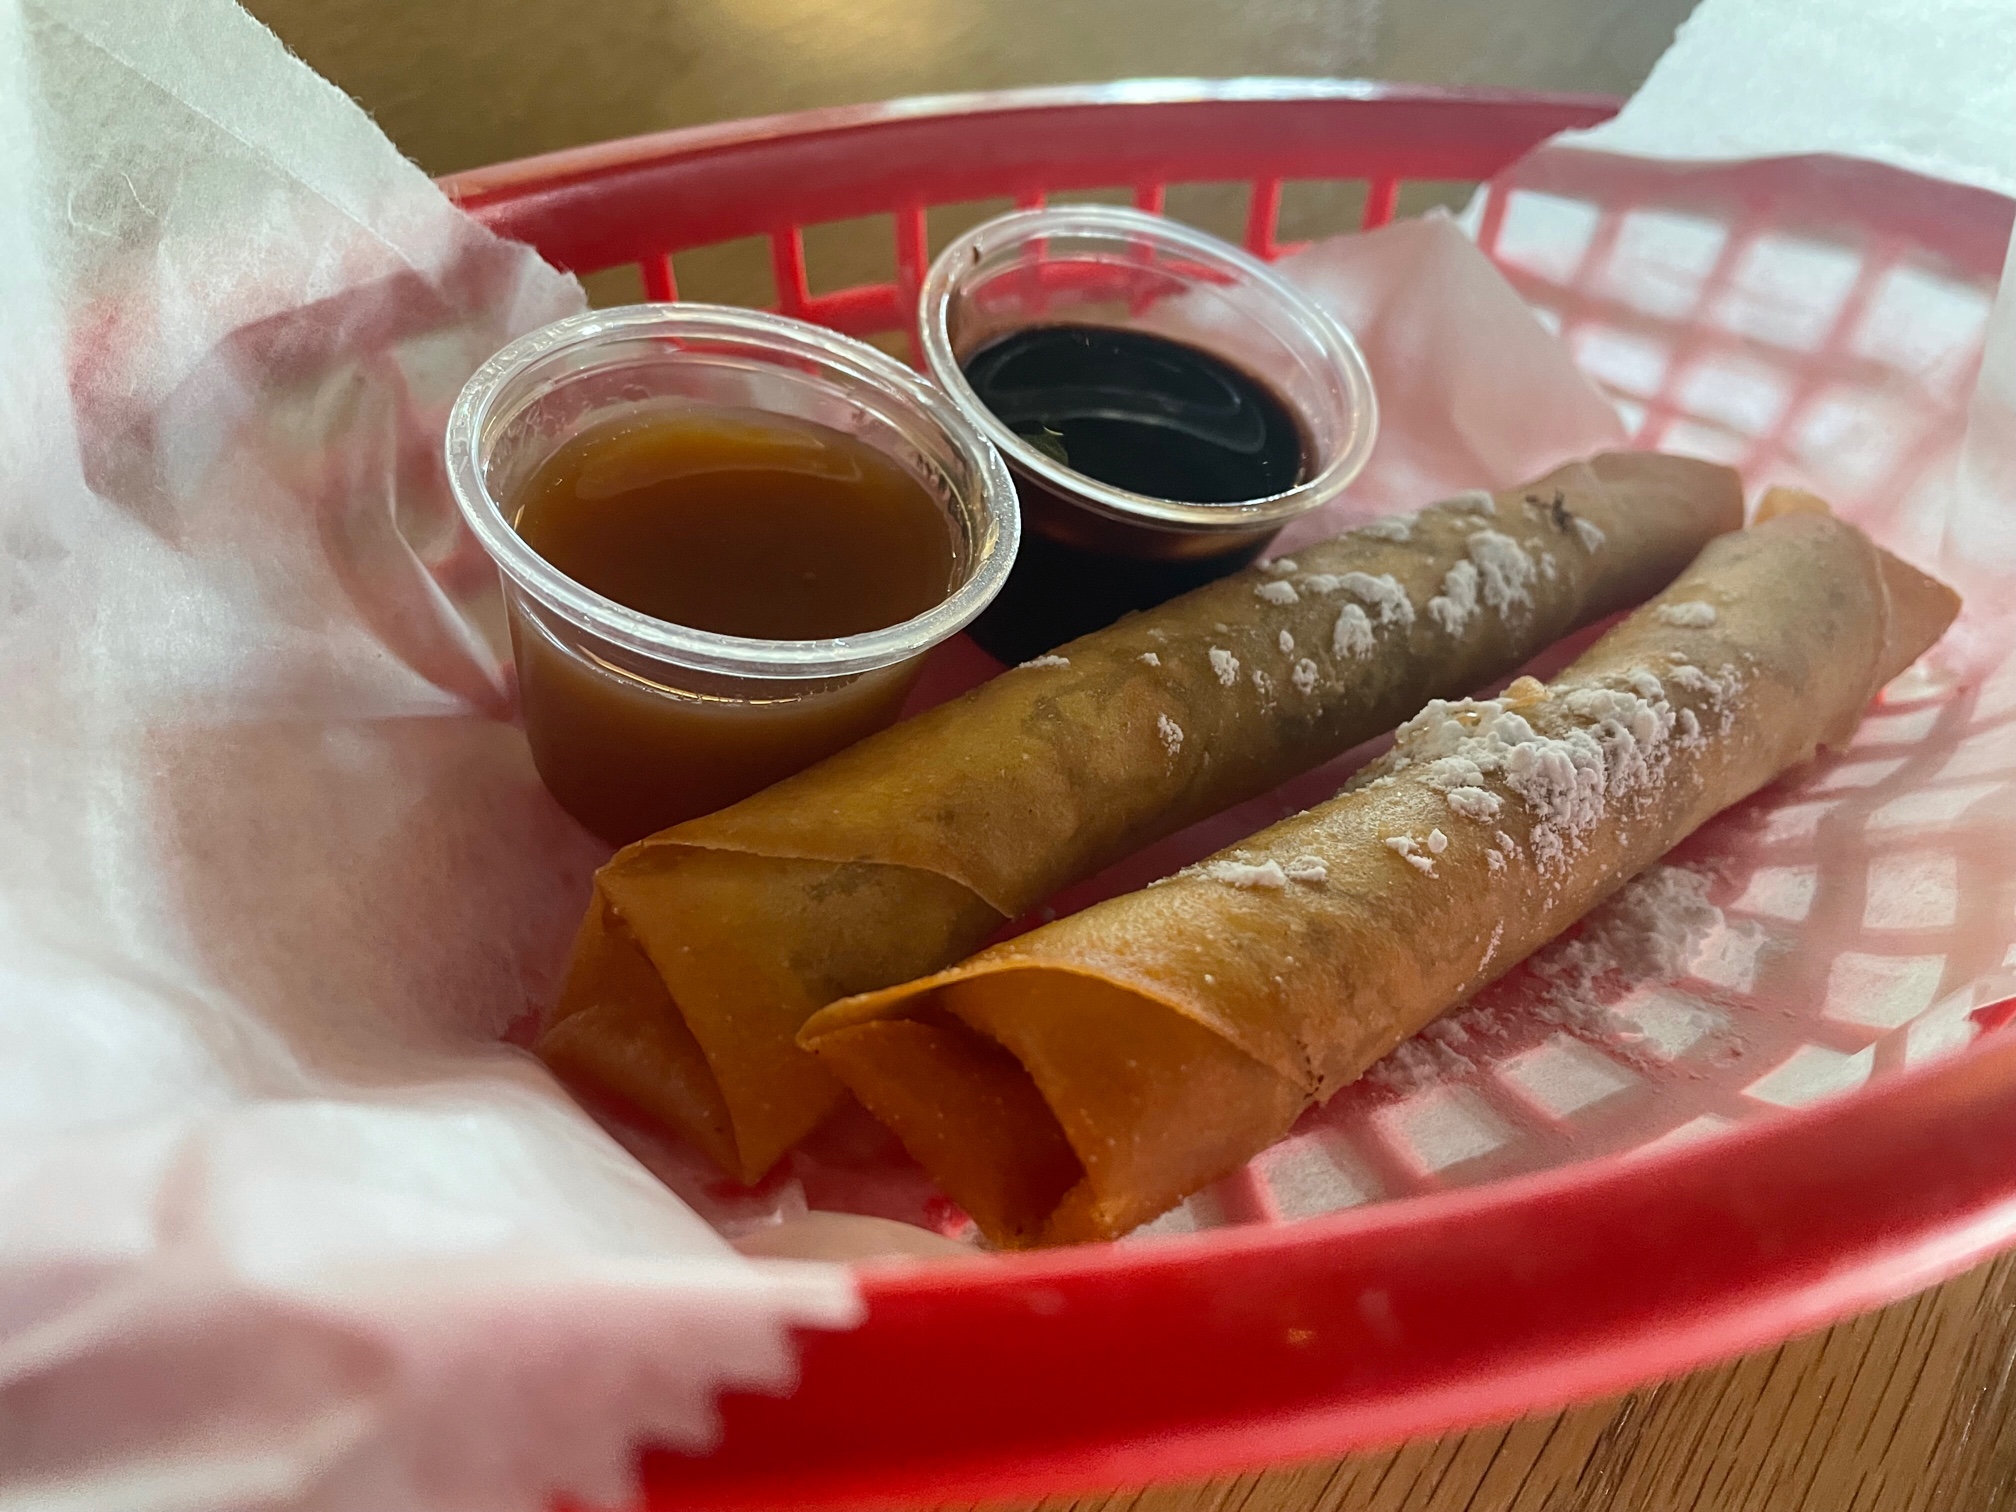 In a red plastic basket lined with parchment paper, there are two turons with two dipping sauces. Photo by Alyssa Buckley.